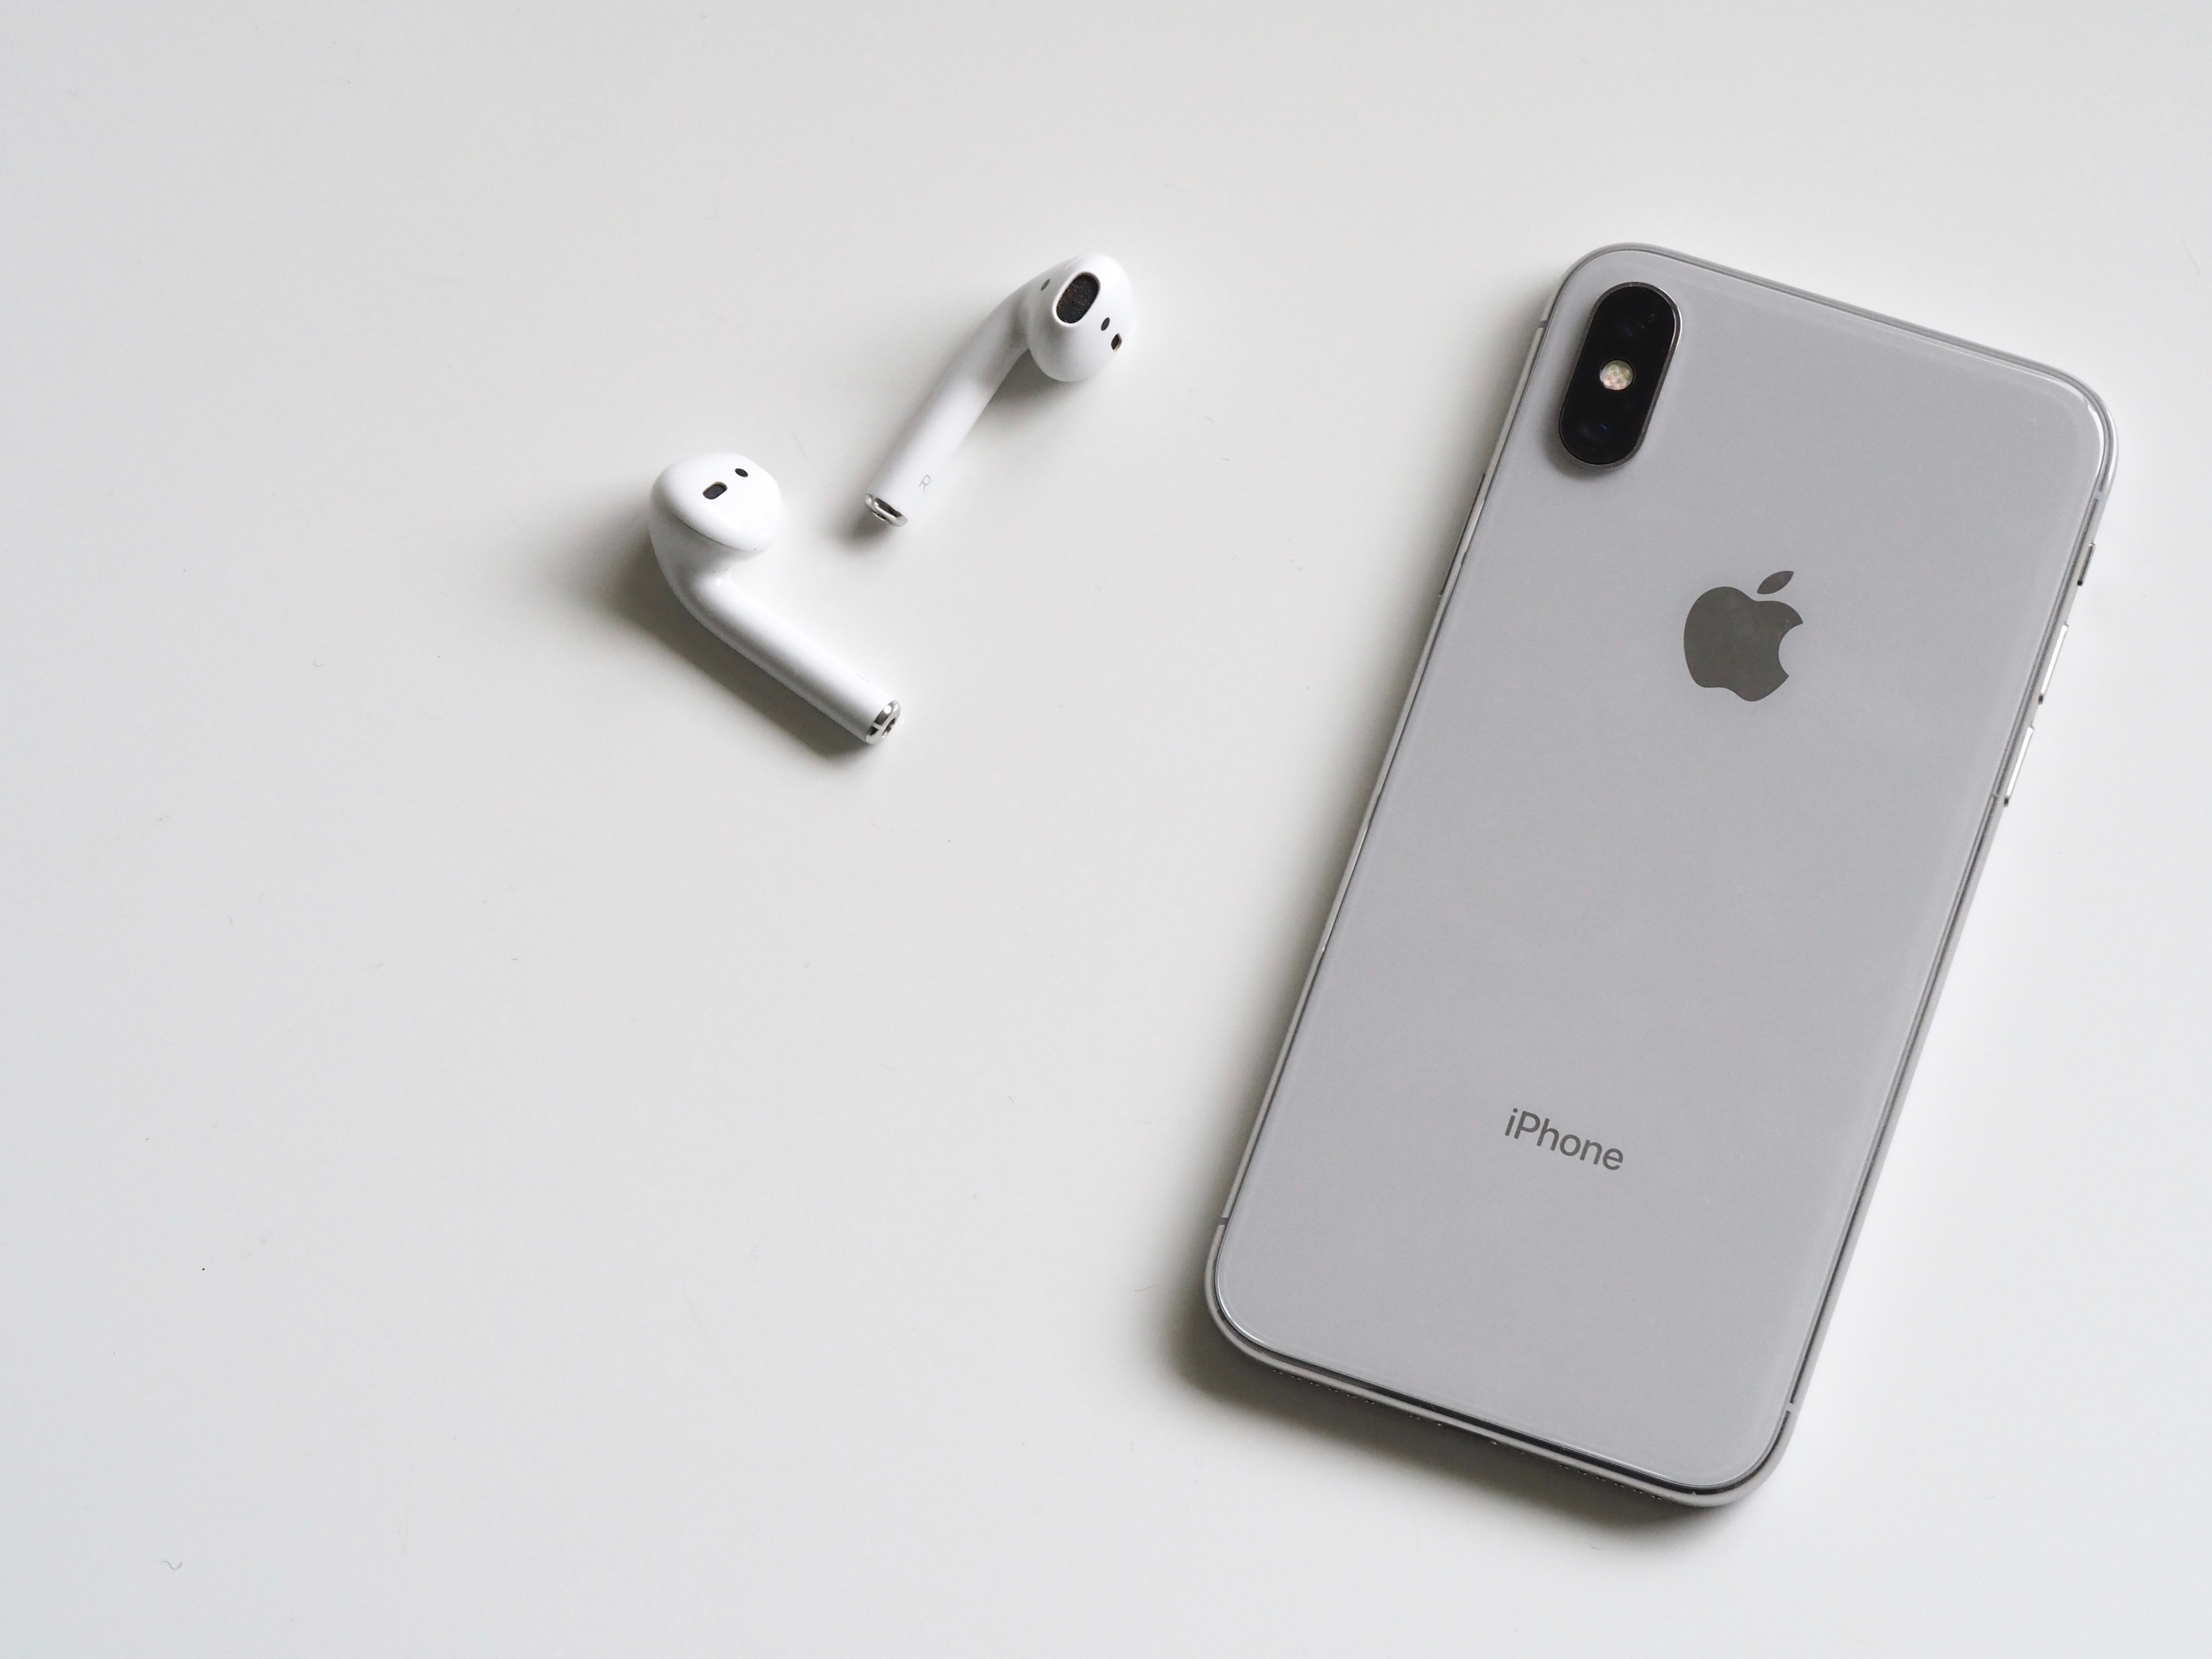 7.5 features and improvements I’d like to see in AirPods 2!